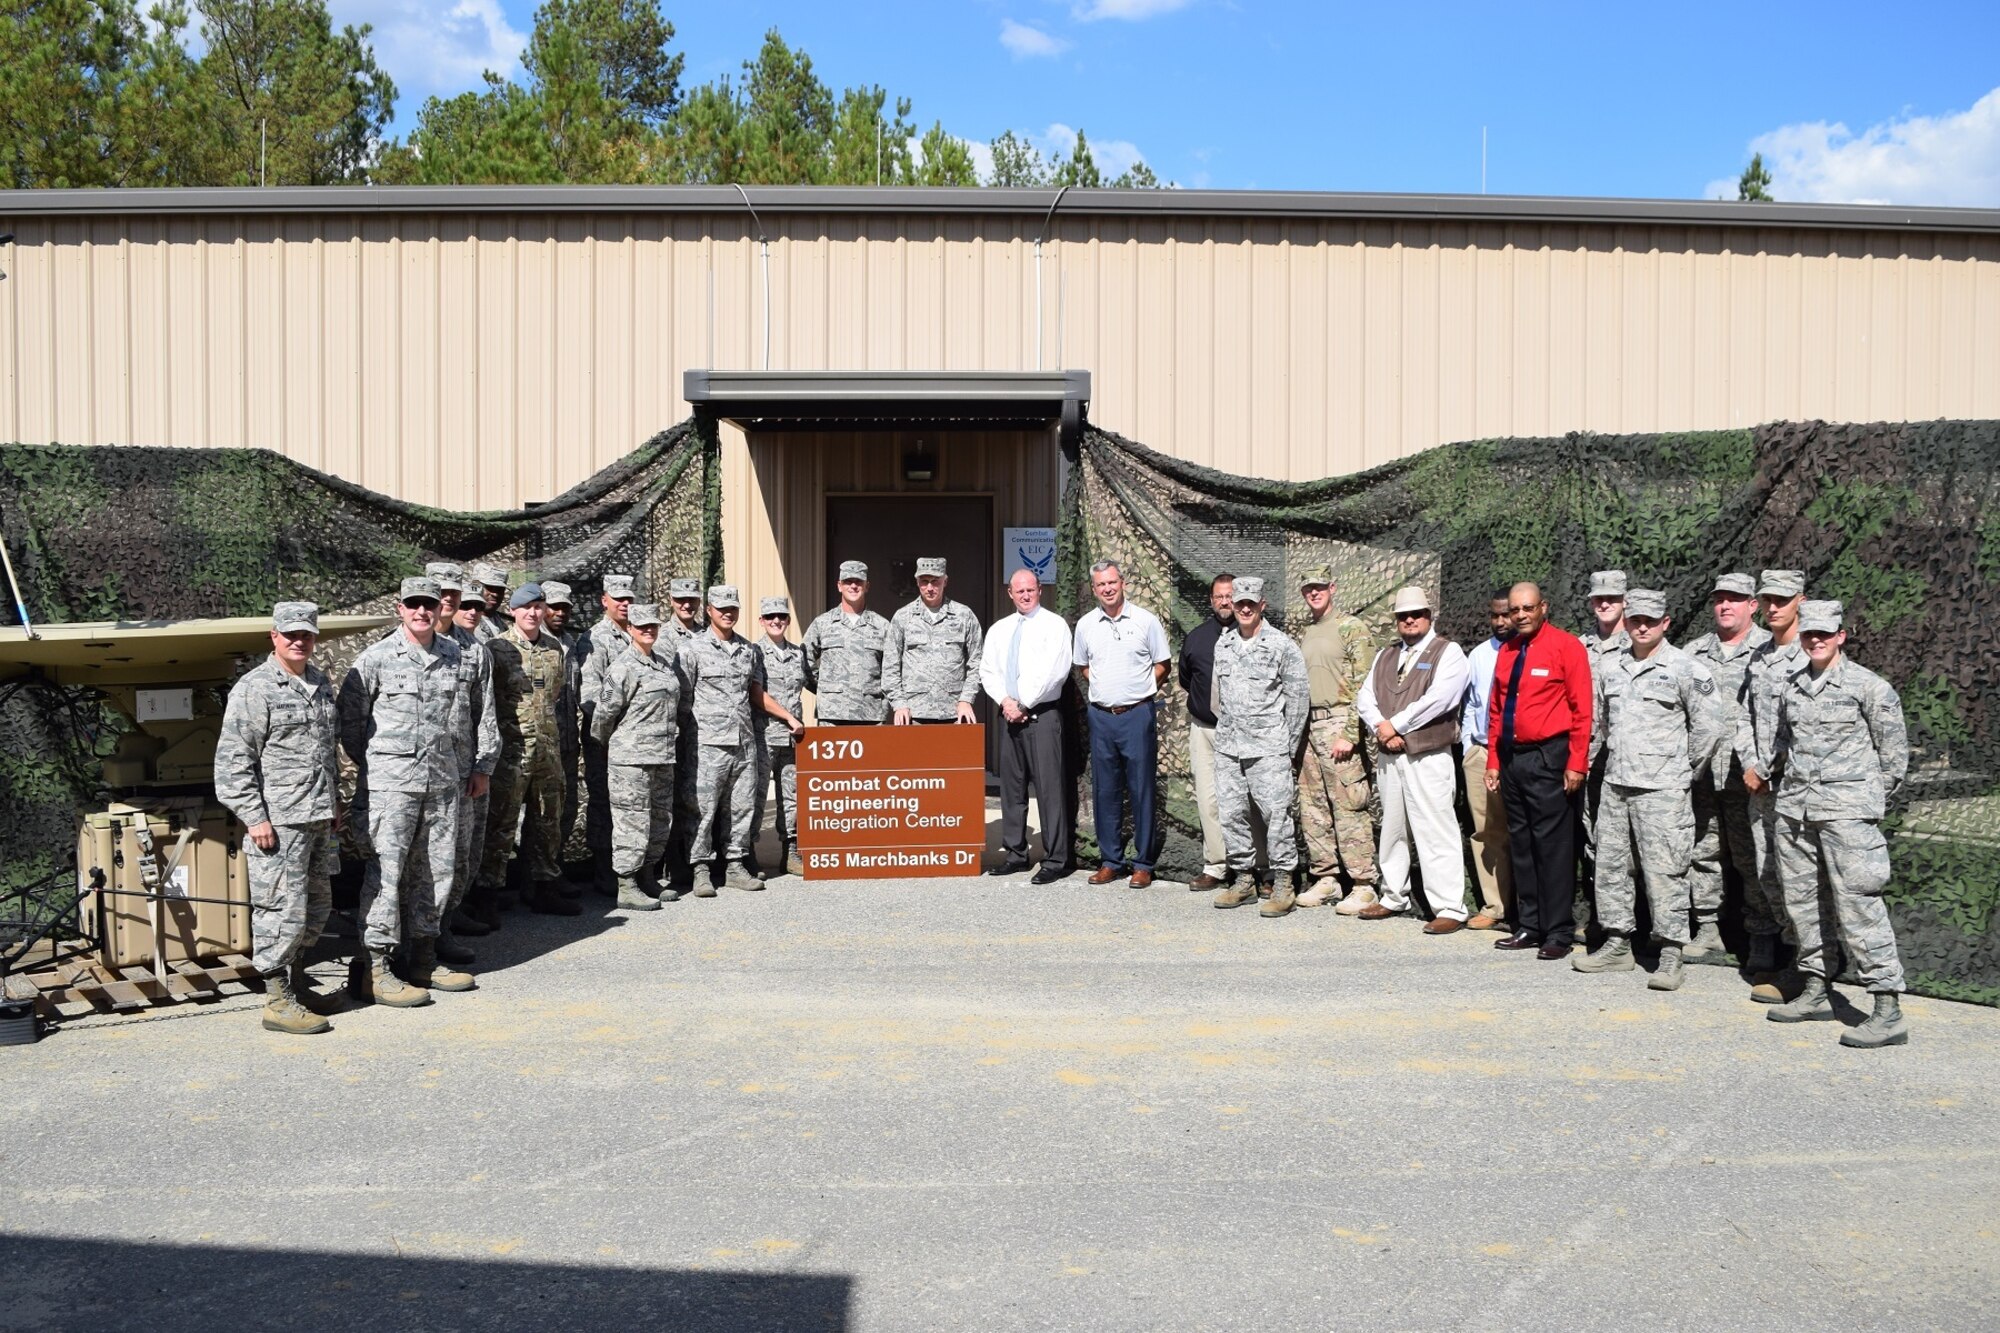 Members of the 5th Combat Communications Group, 226th Air National Gaurd, the Air Force Reserve Command A6, and several others pose in front of the new Combat Communications Engineering Integration Center at Robins AFB 19 Oct.